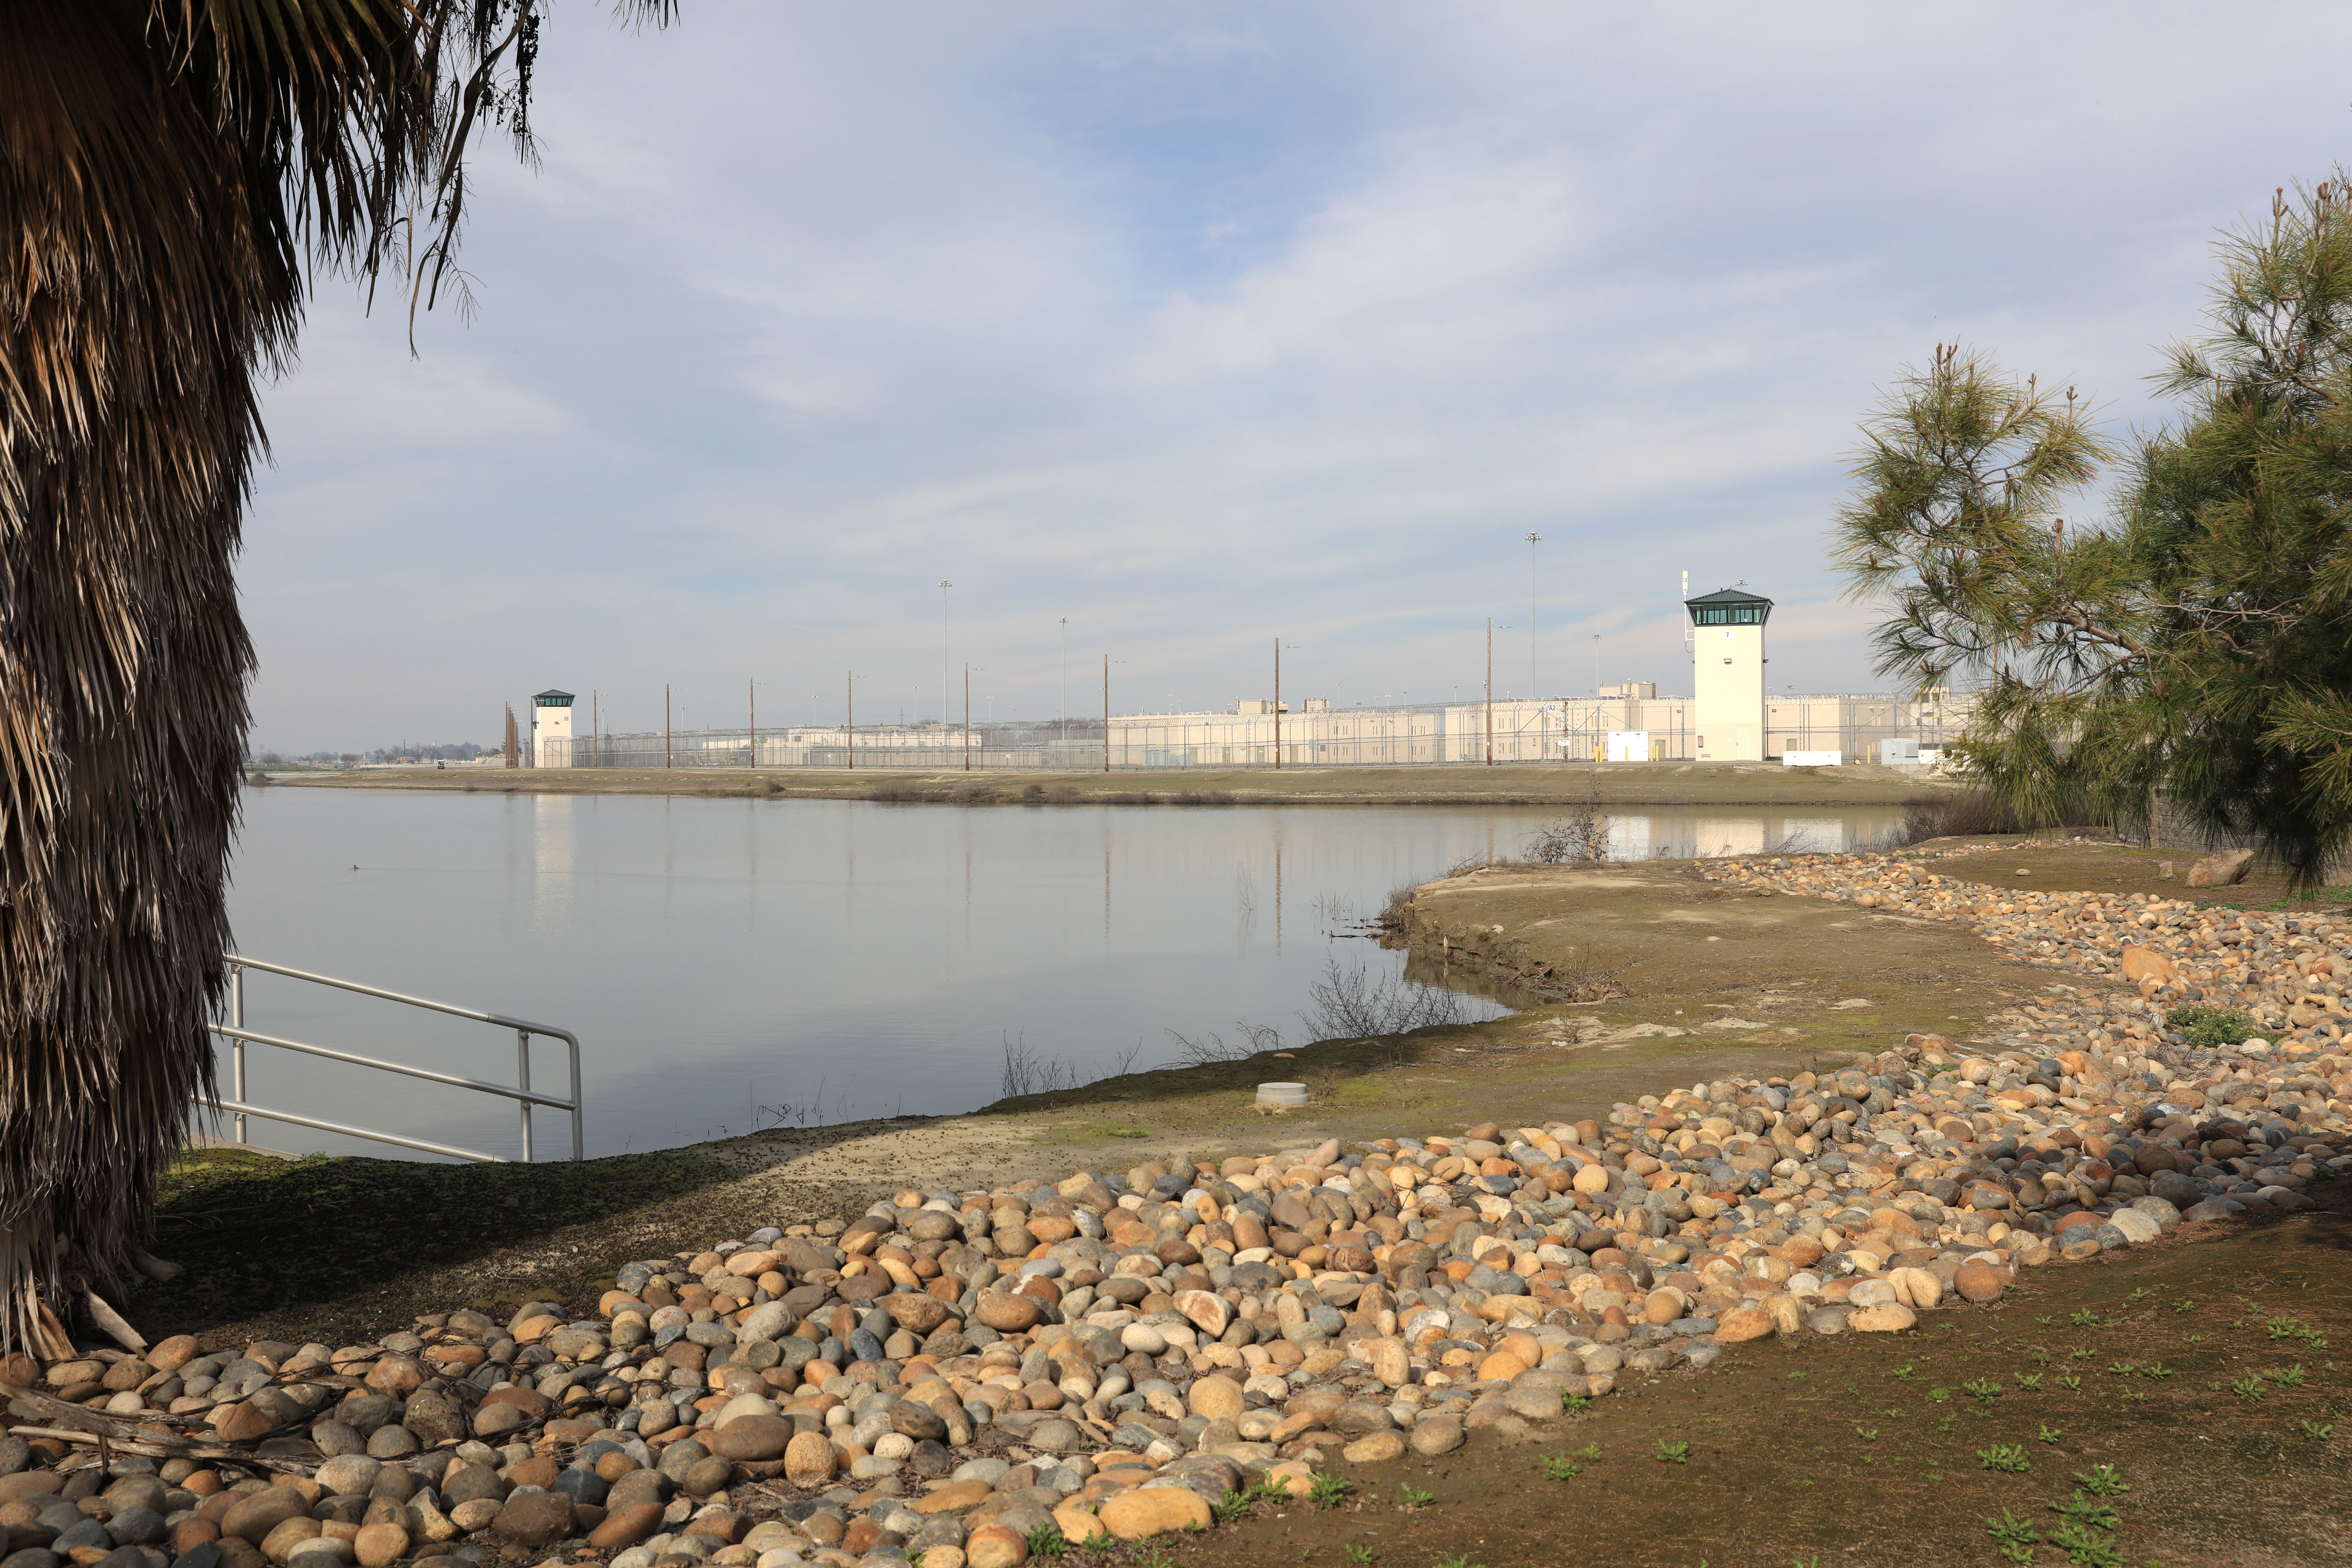 landscape of prison facility situated beside a lake